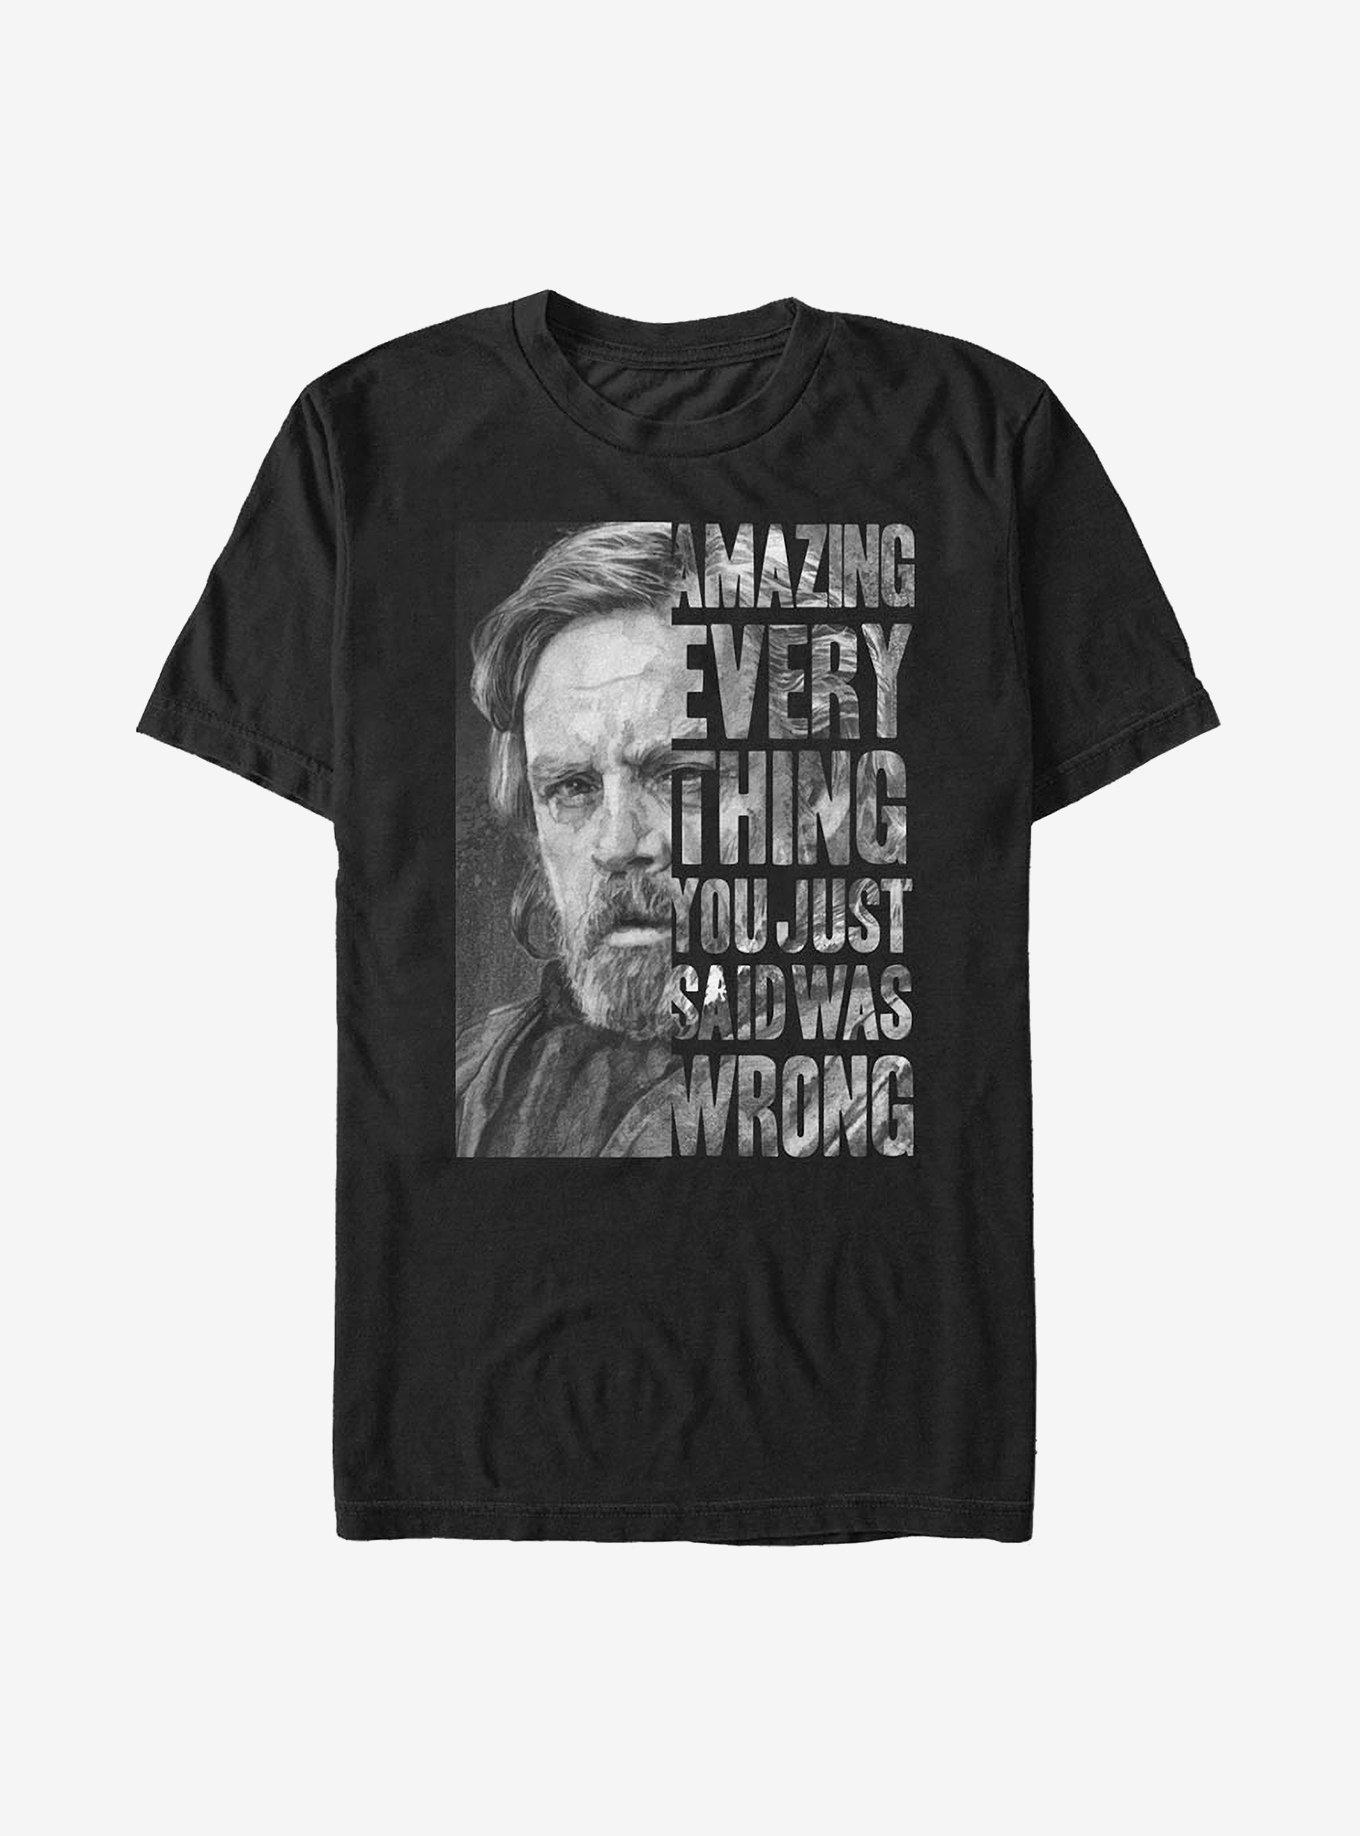 Star Wars: The Last Jedi Amazingly Wrong T-Shirt